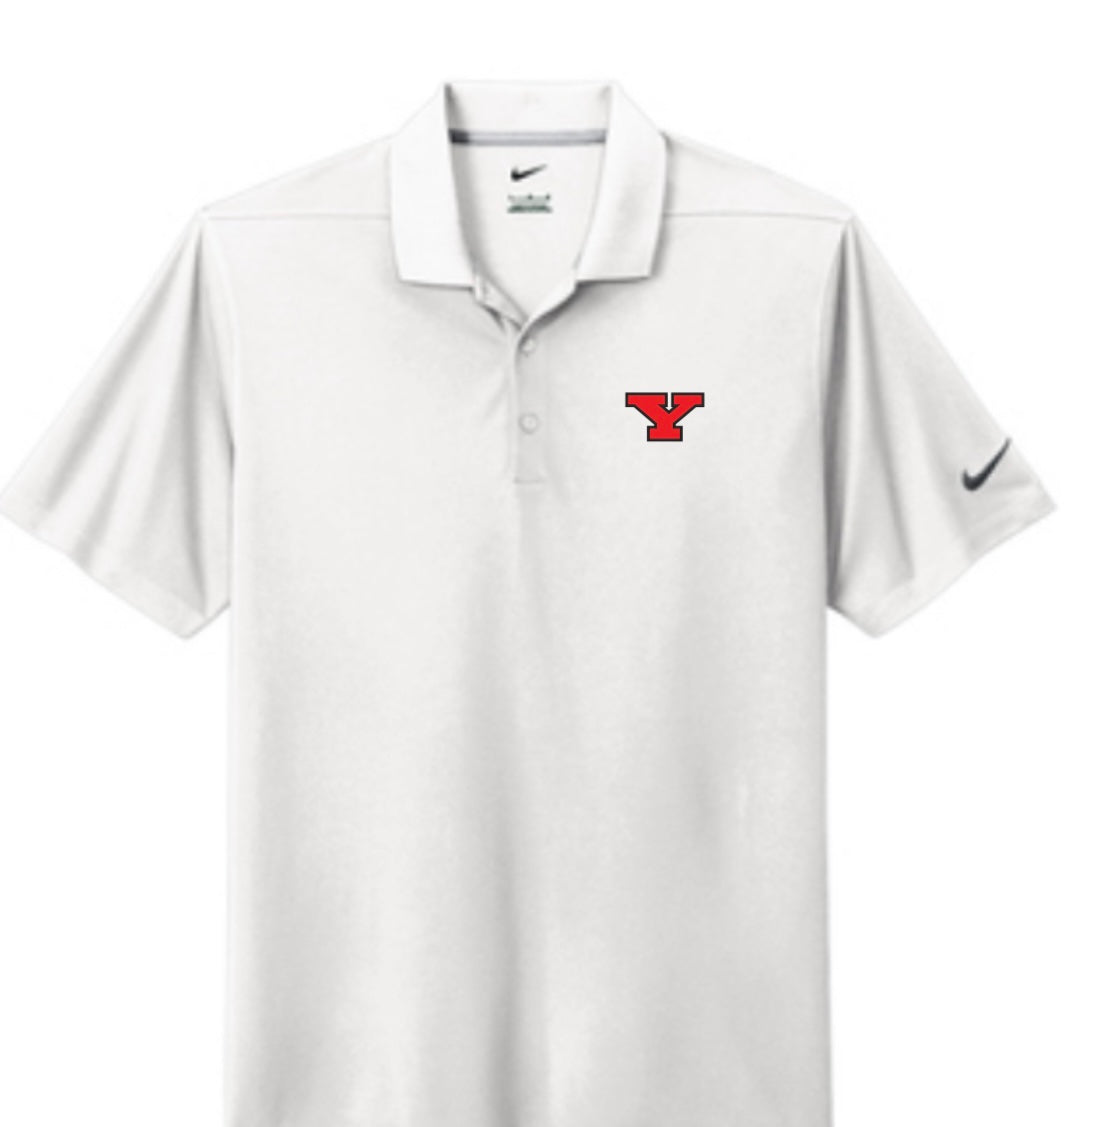 Nike 2.0 Youngstown State Polo – Eagle Wear Inc